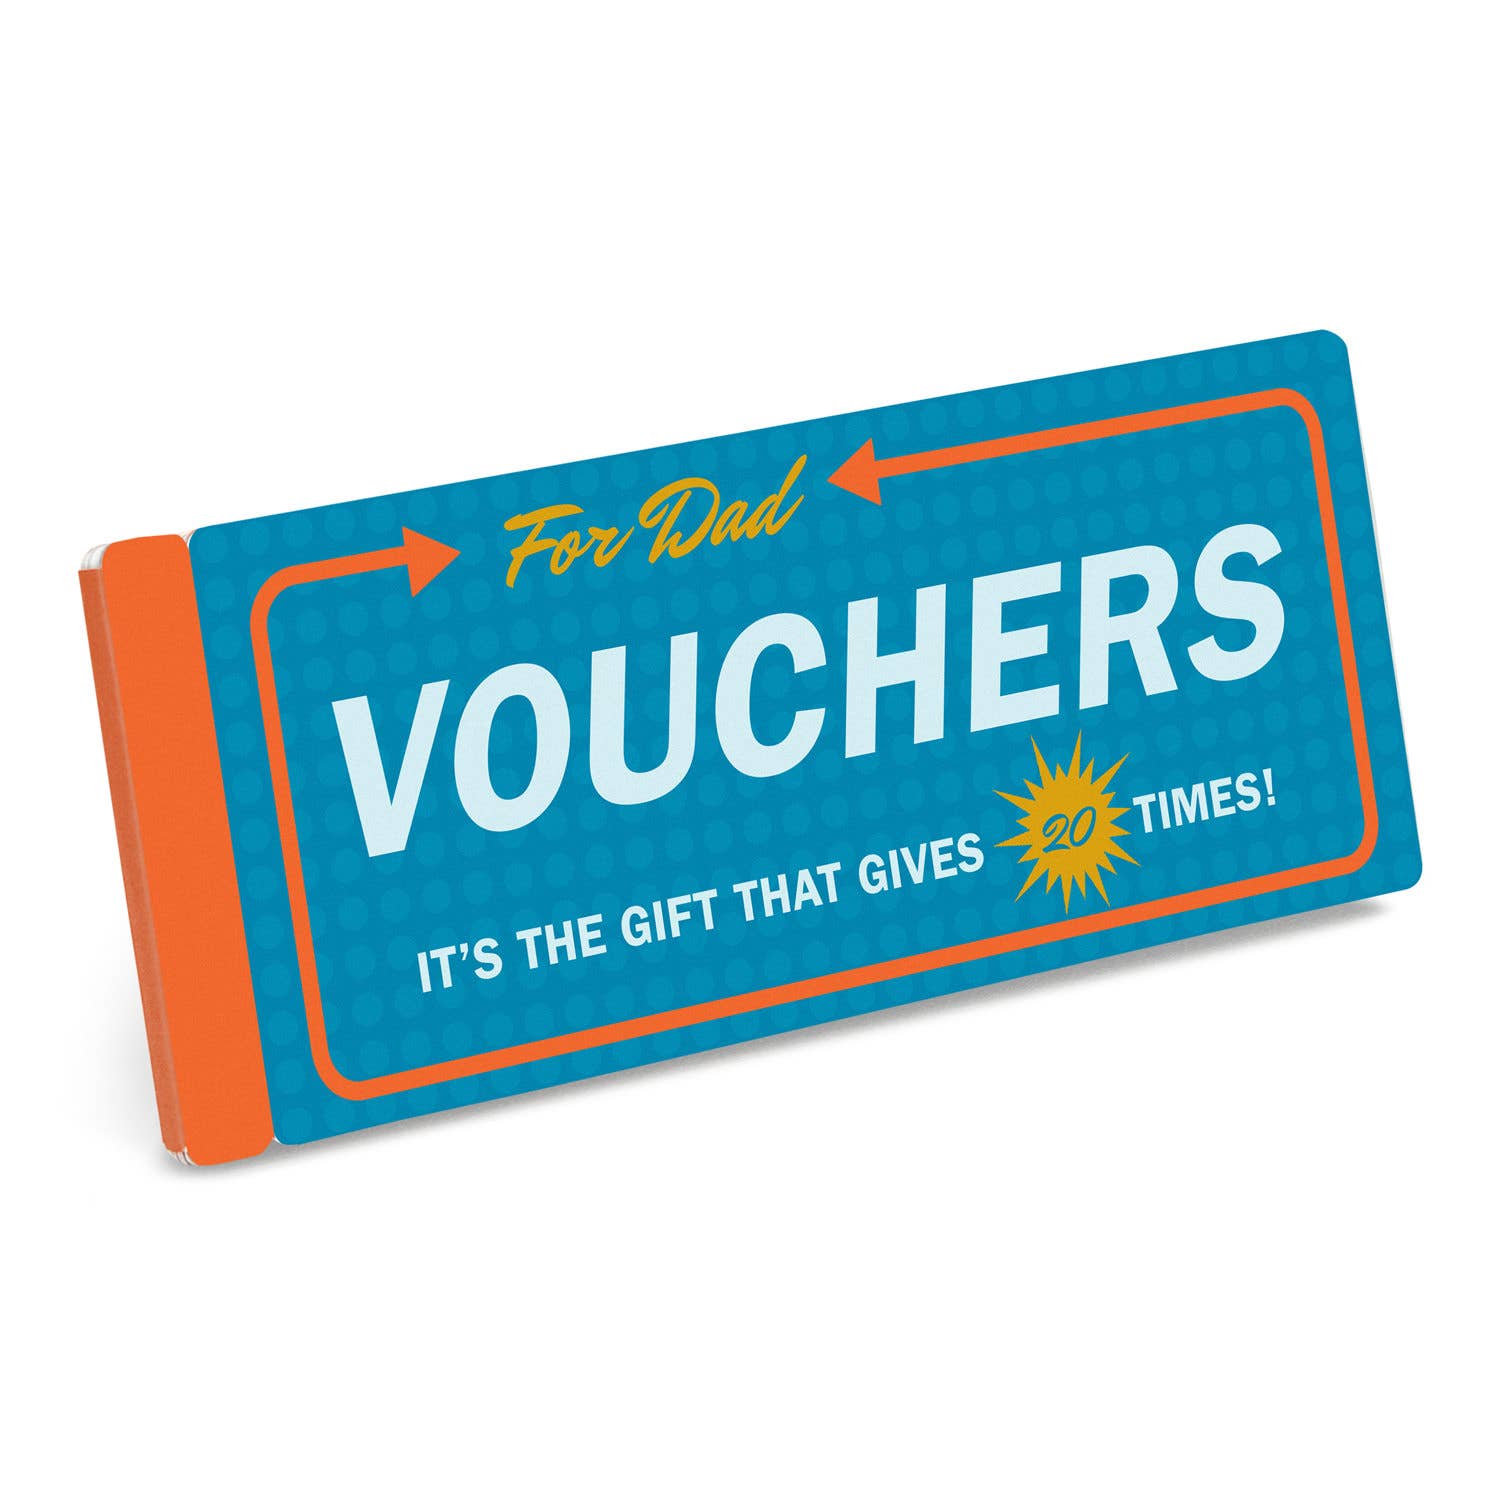 Vouchers for Dad - Spiral Circle